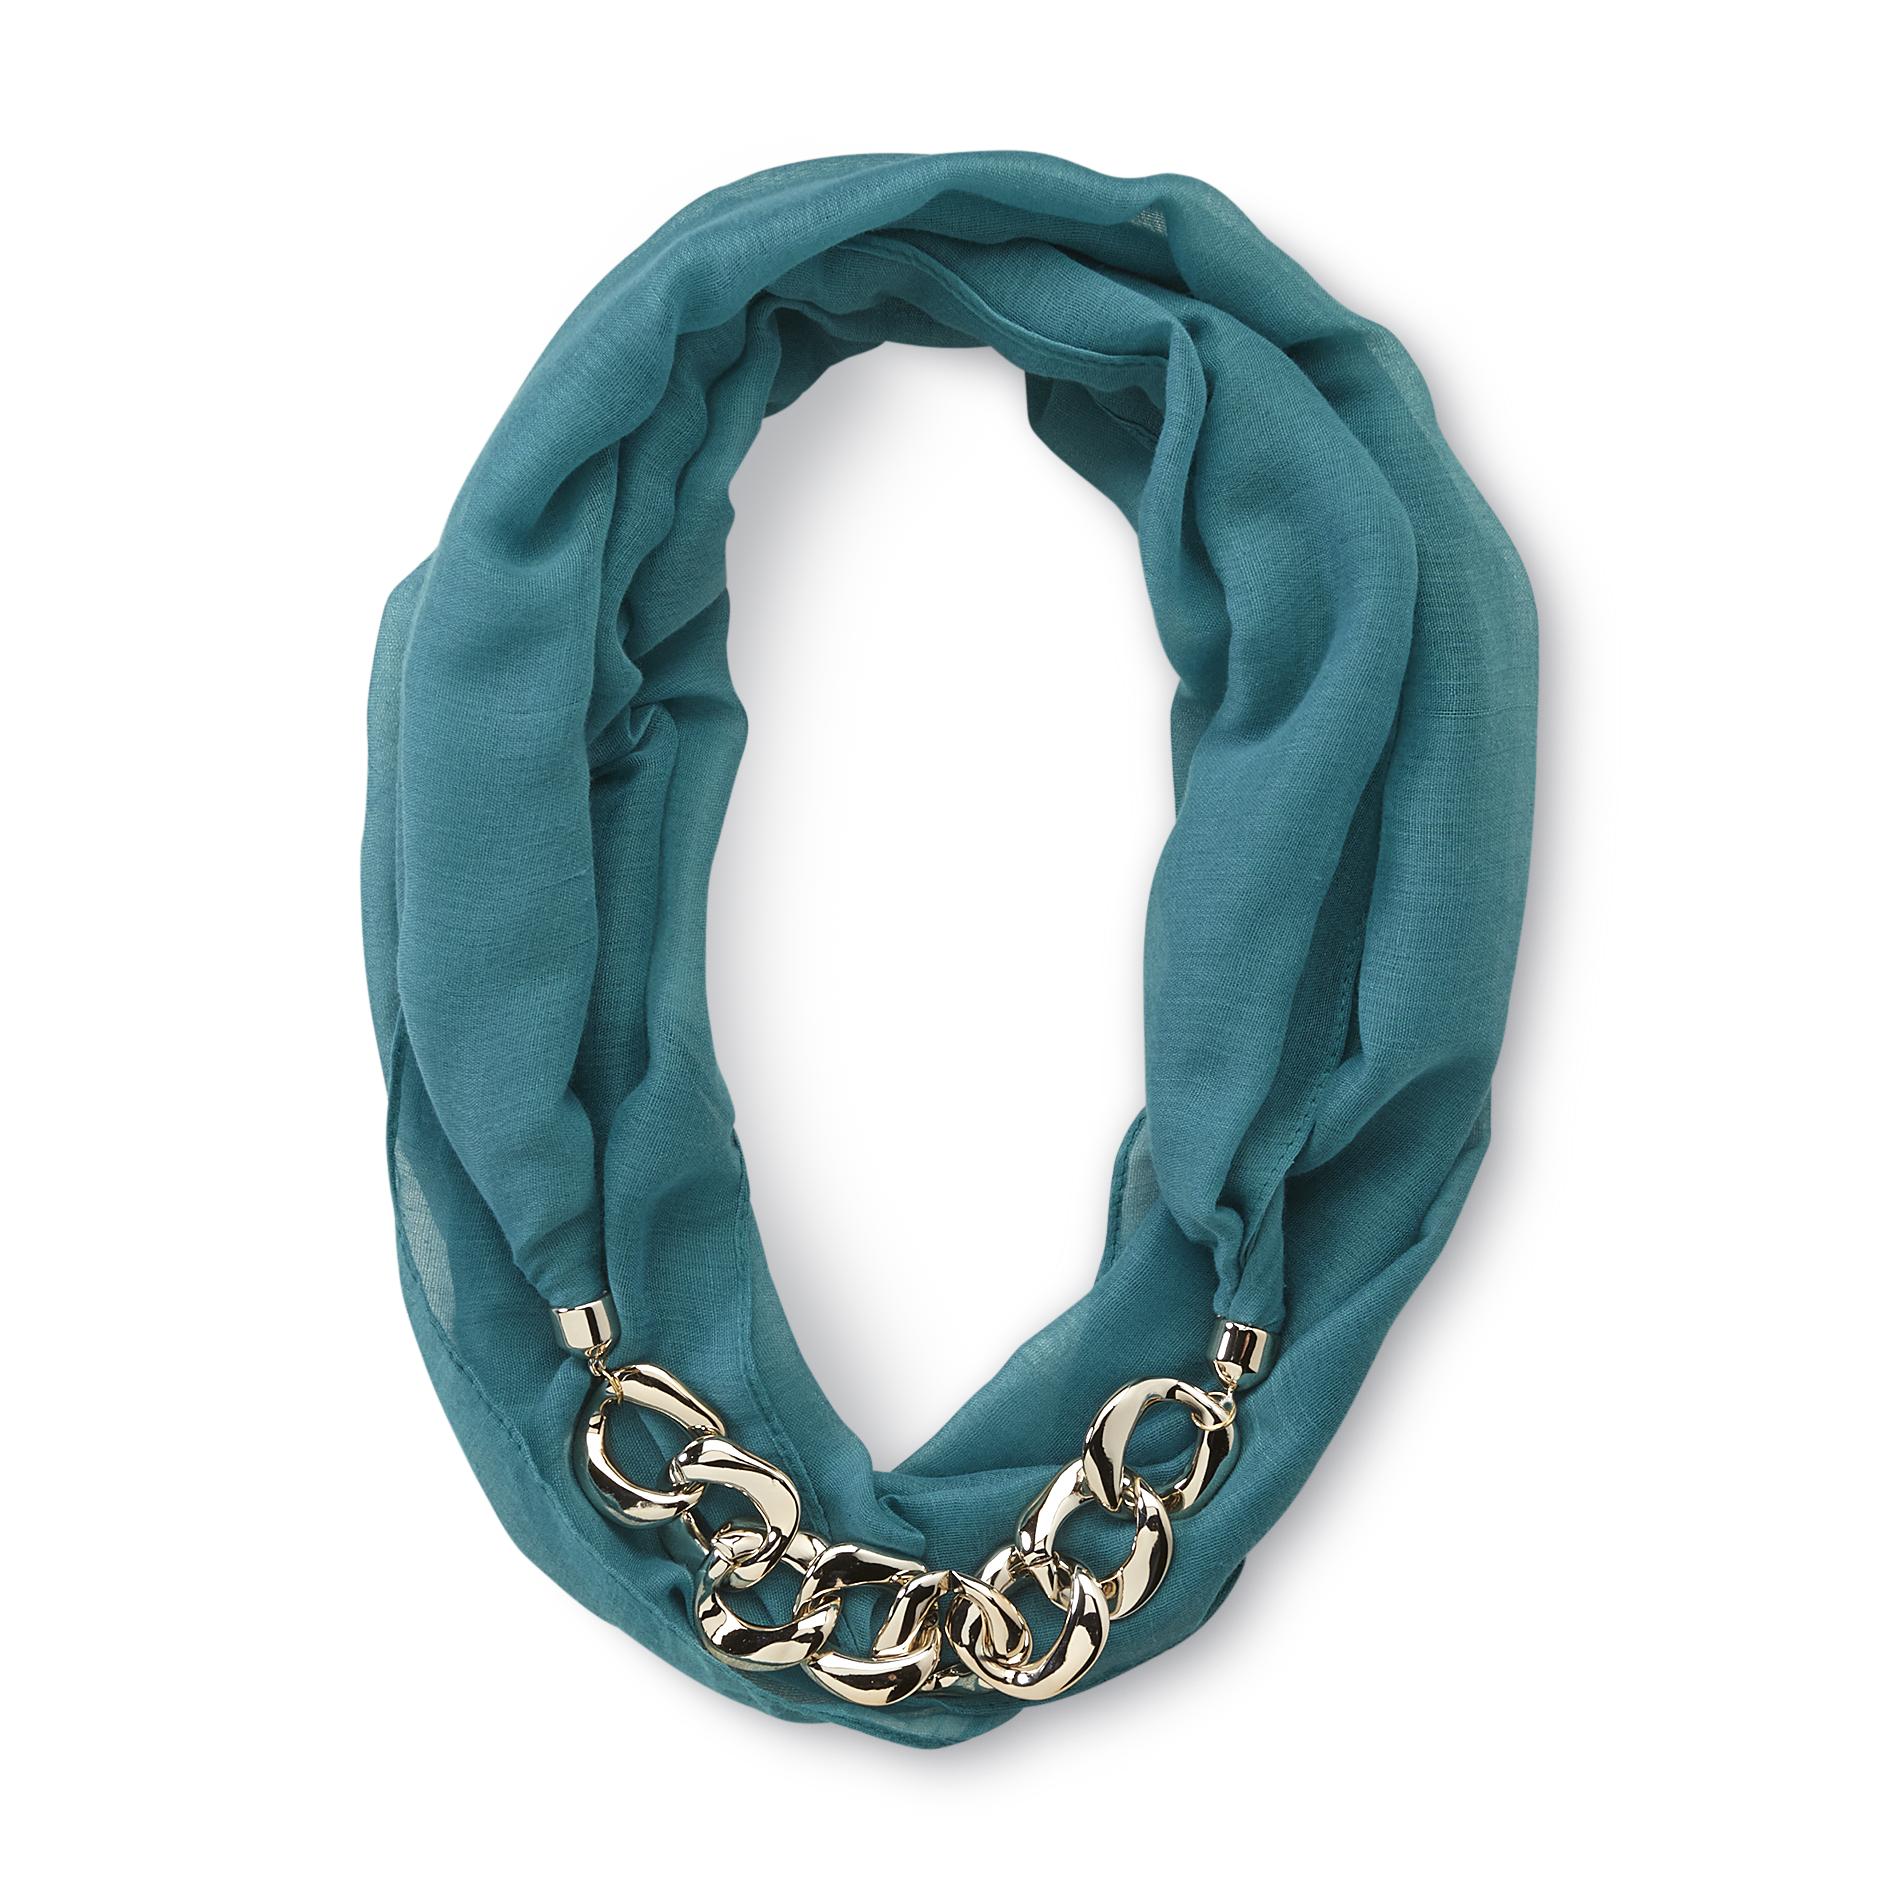 Attention Women's Infinity Scarf